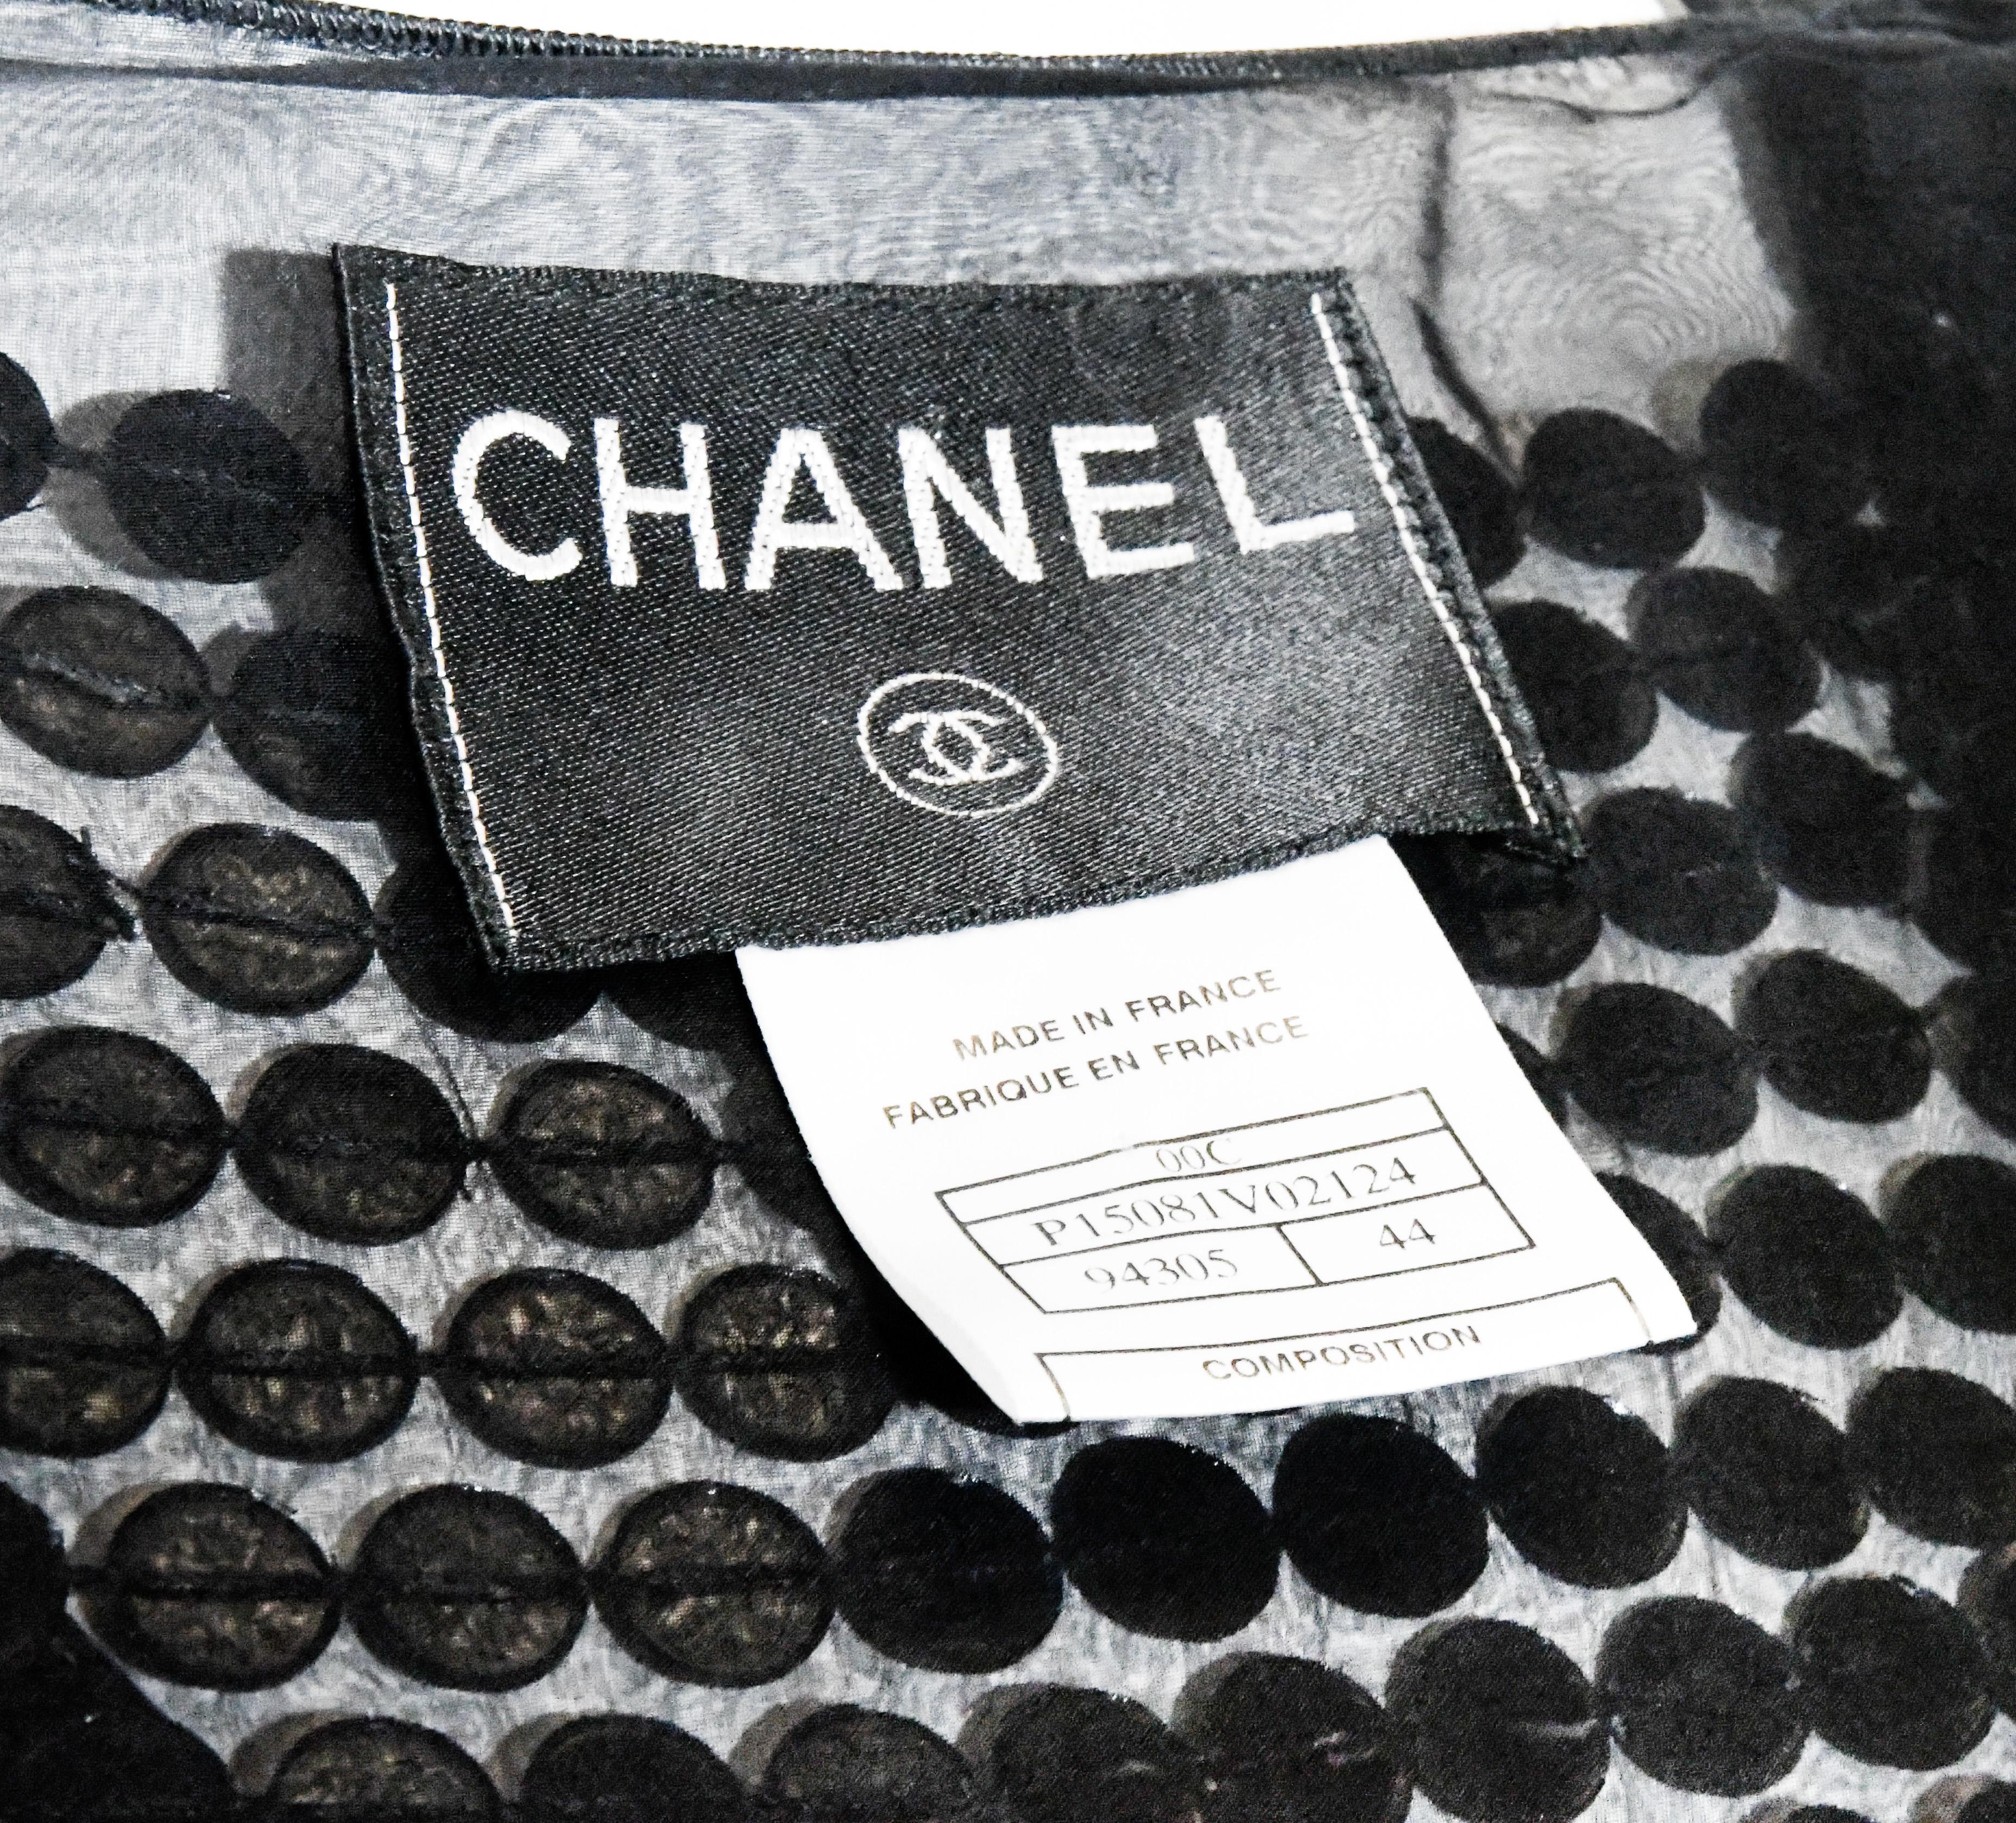 Chanel 2 Piece Black Evening Acrylic Disc Covered Silk Chiffon 2000 Cruise Set For Sale 2